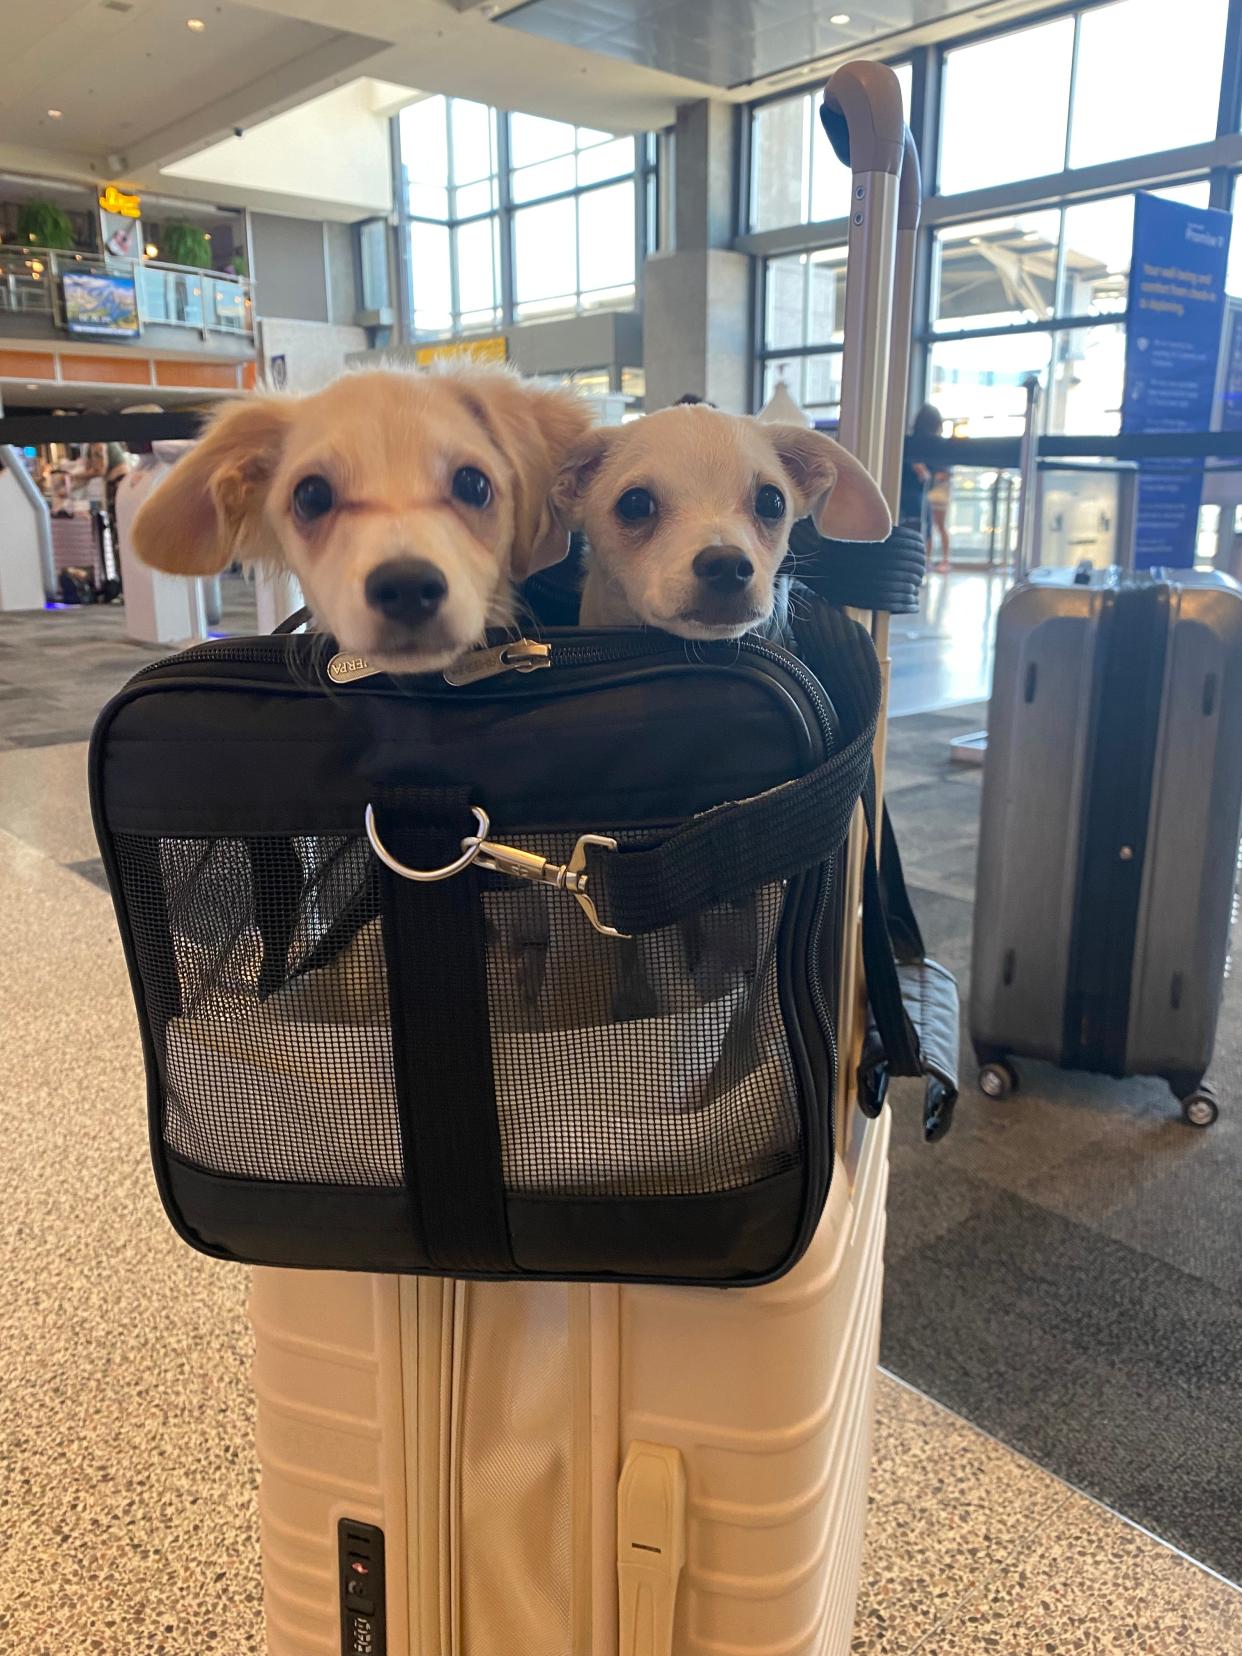 Wilbur and Cannon, two puppies from Smithville on their way to New York to participate in the Puppy Bowl.